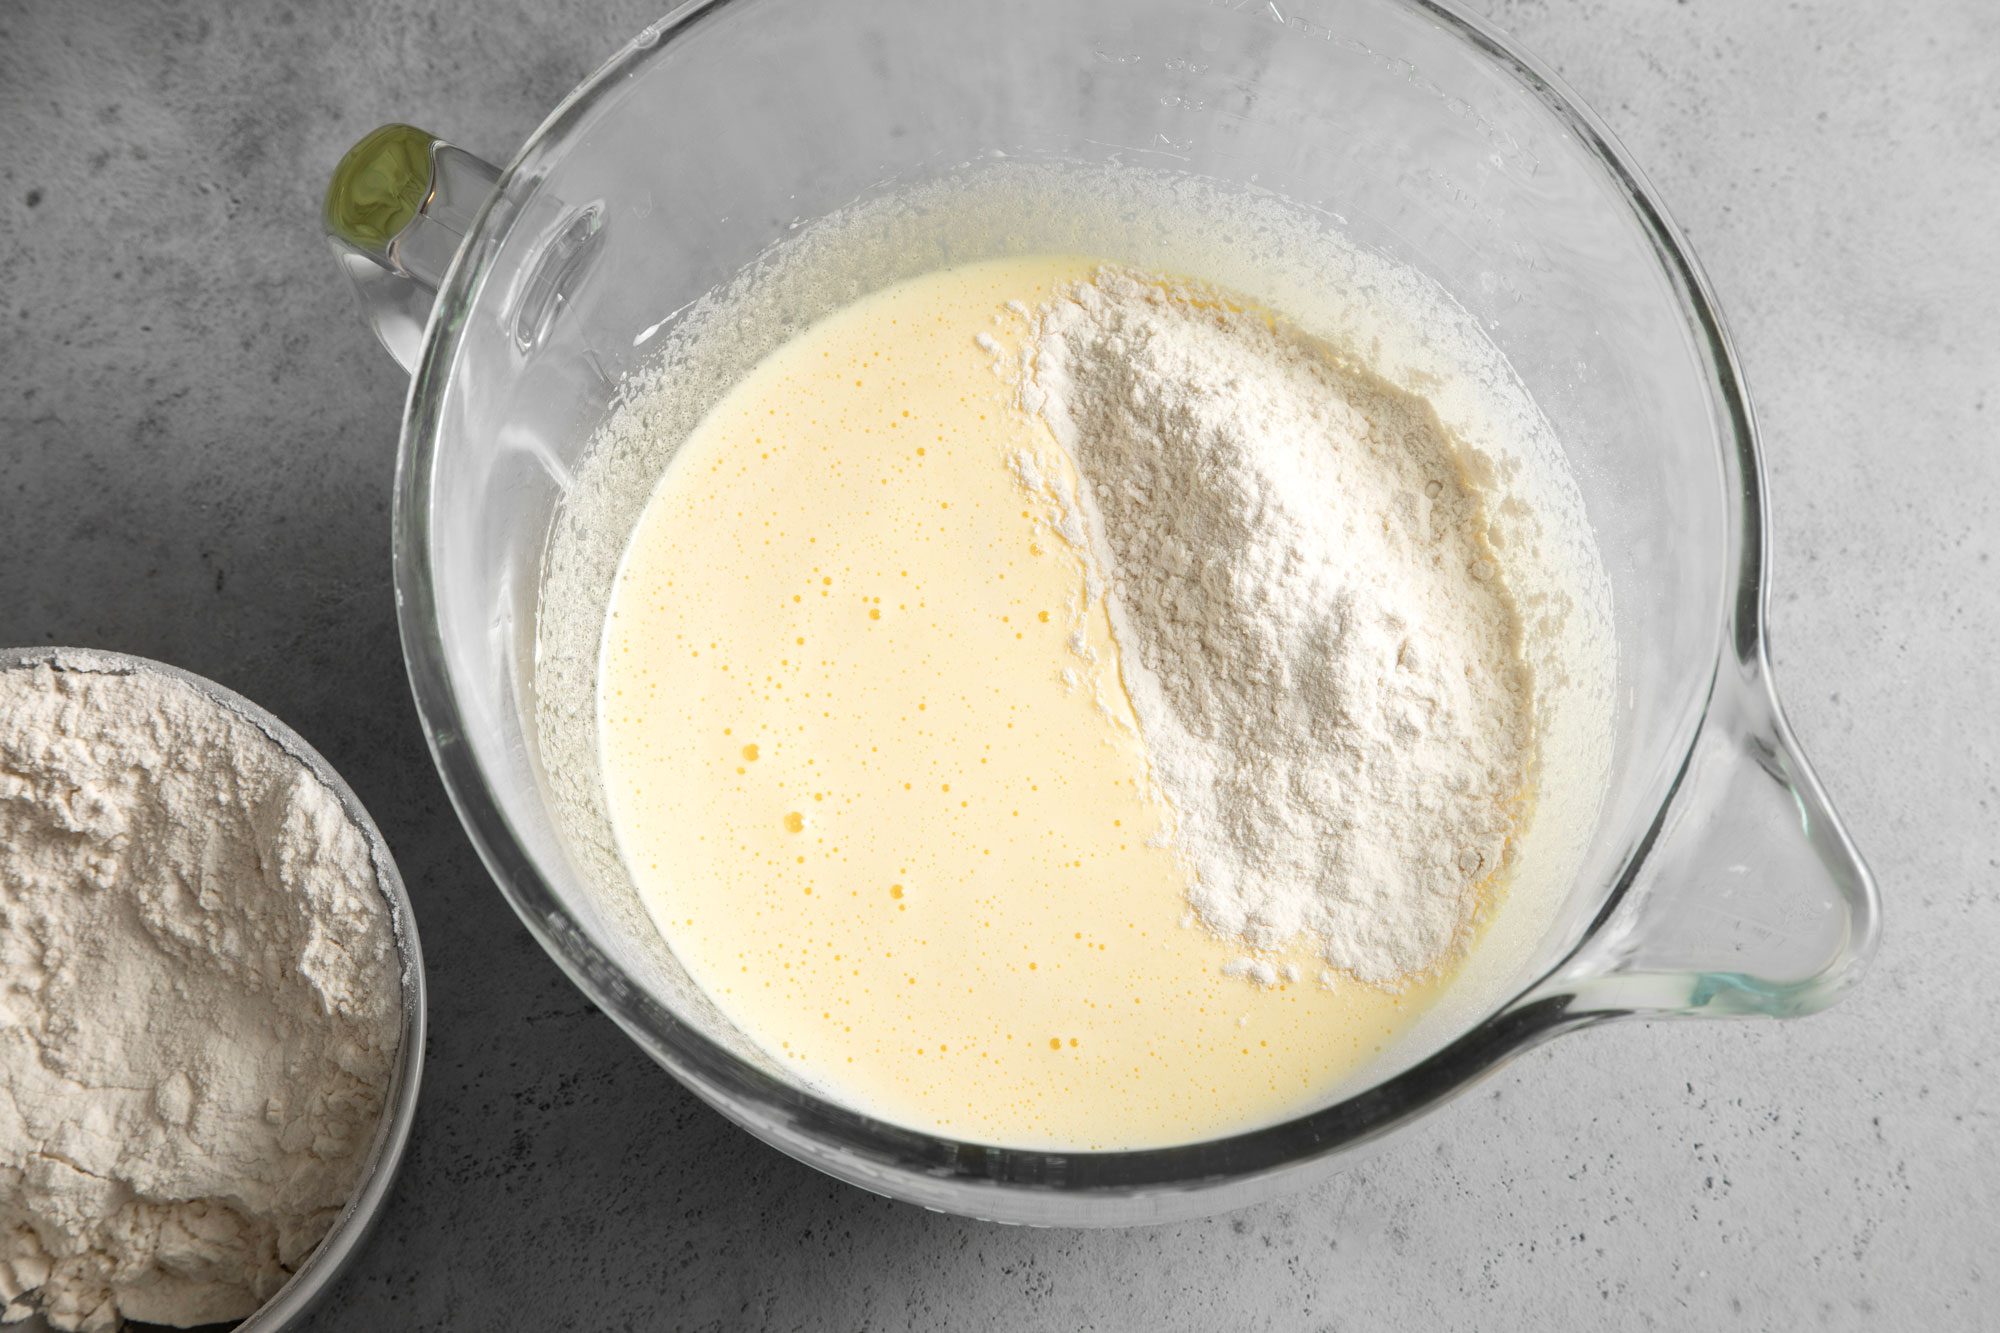 Combine the flour and baking powder in a separate bowl